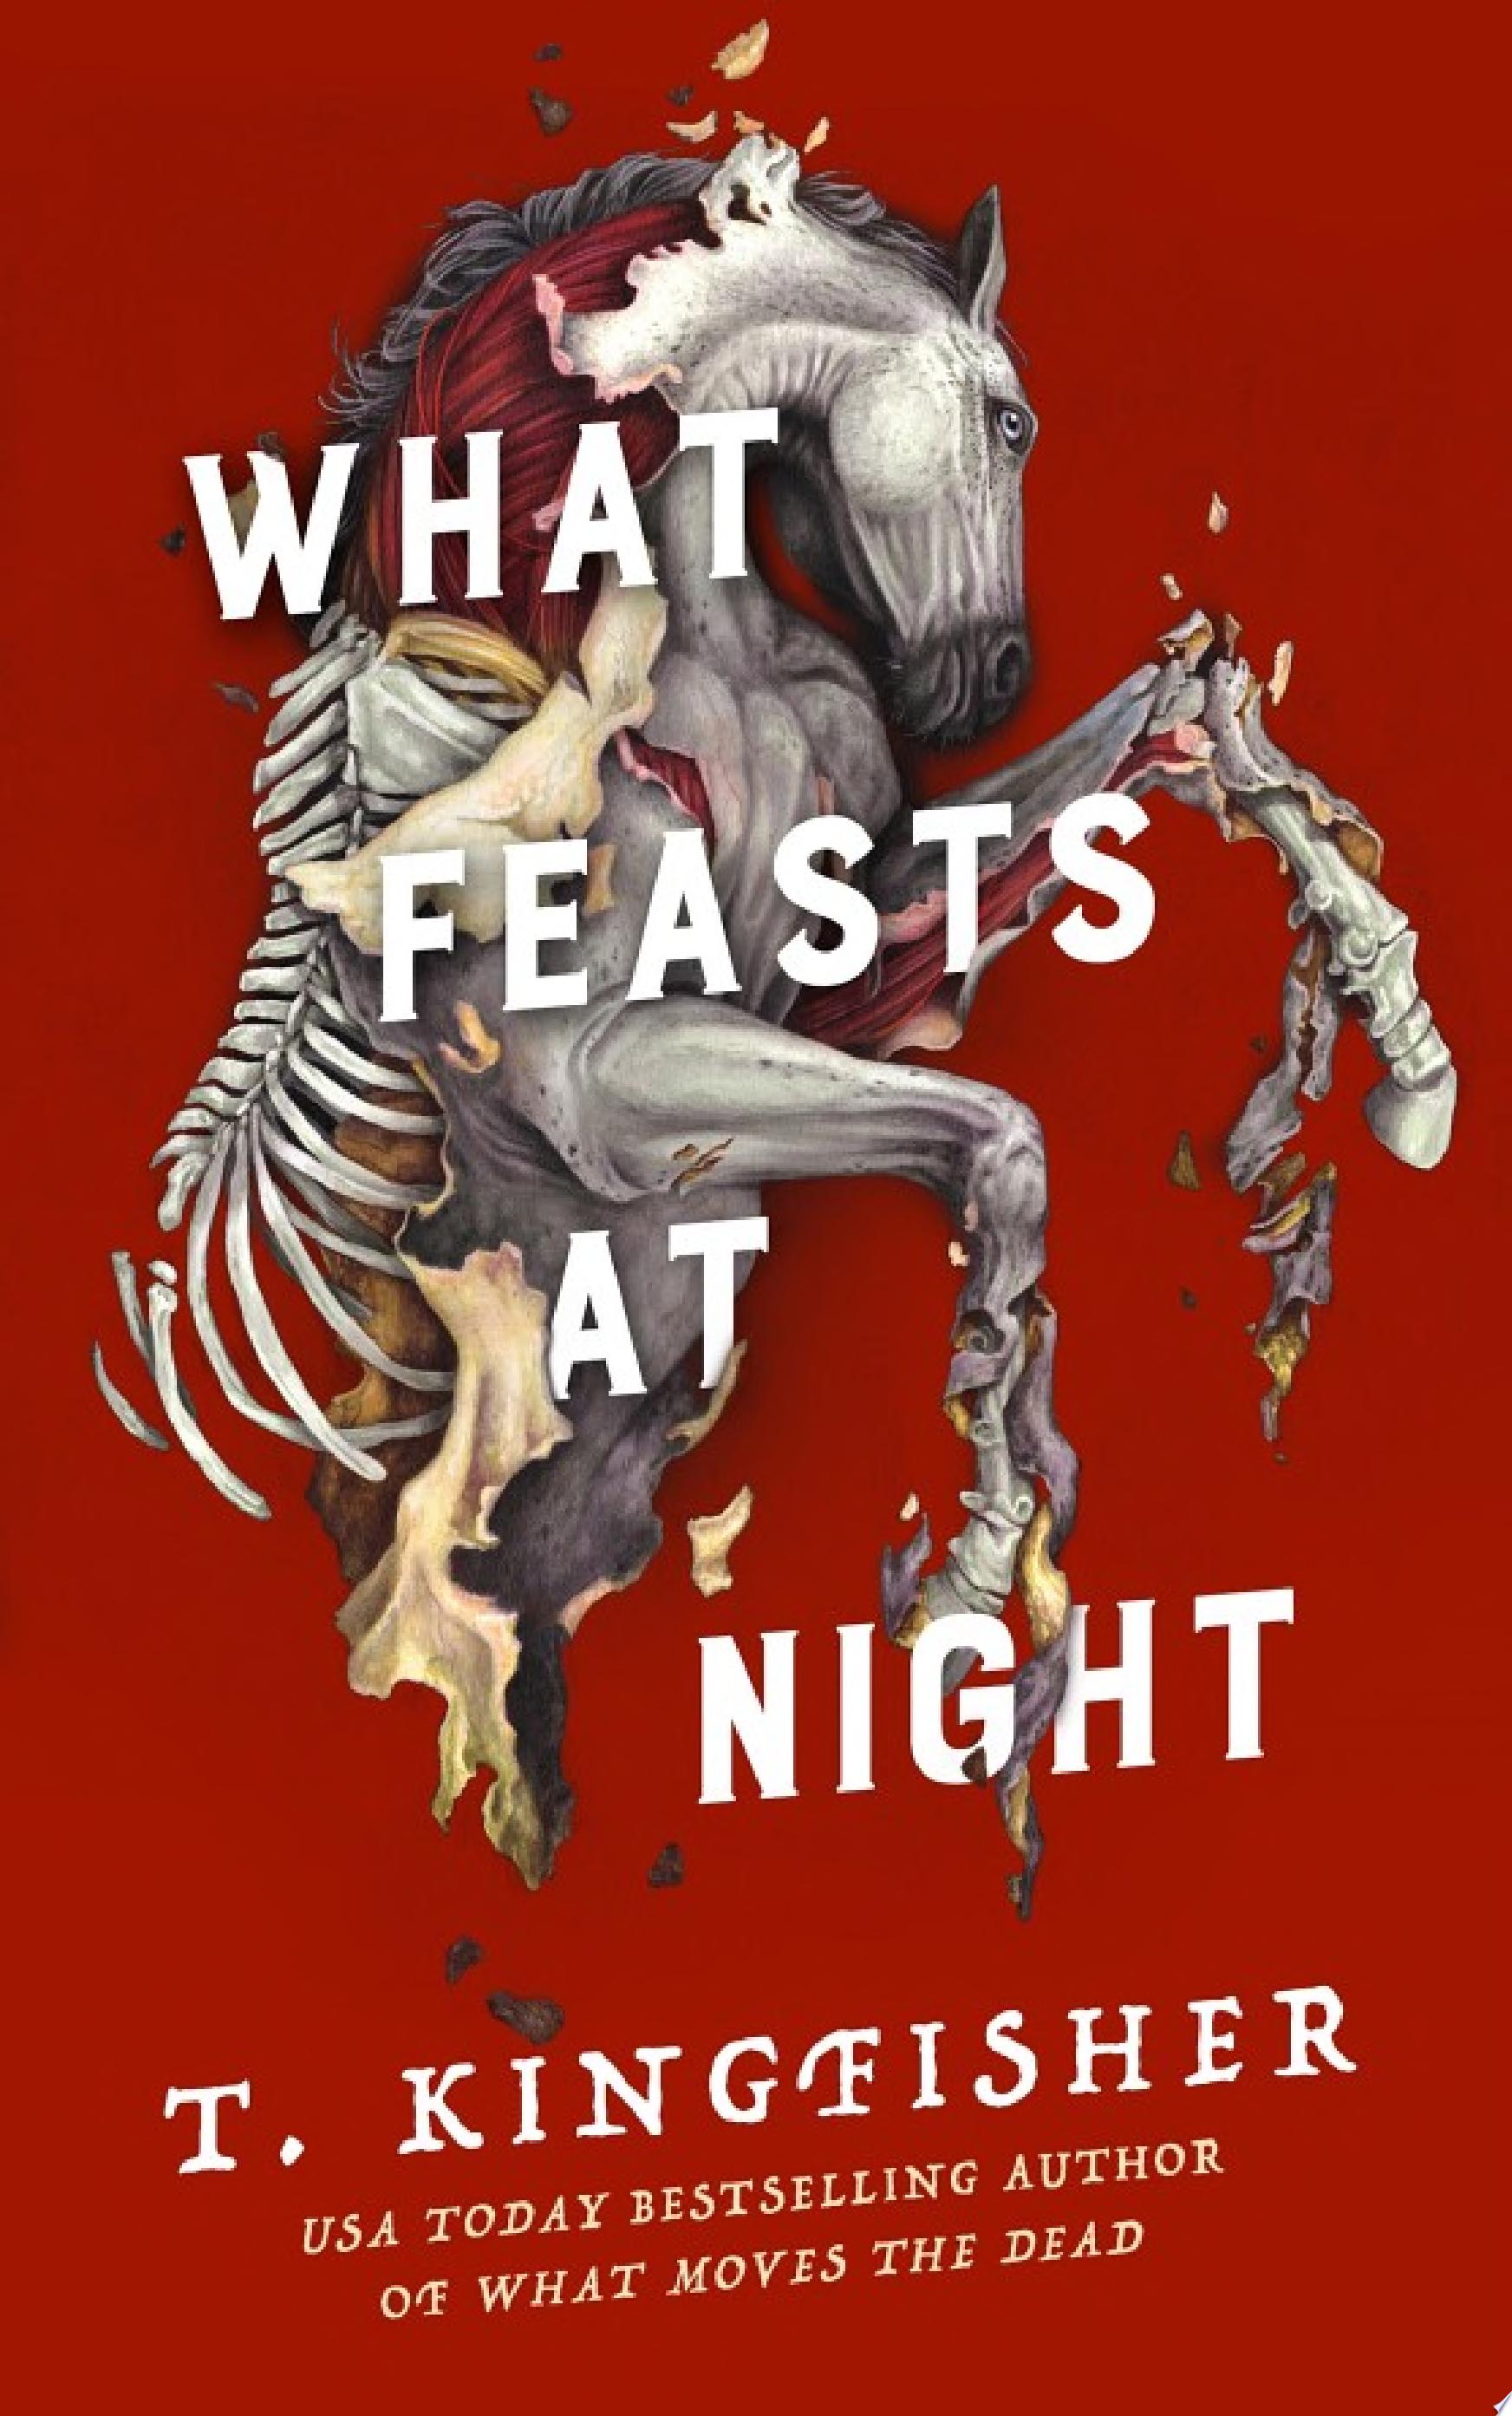 Image for "What Feasts at Night"